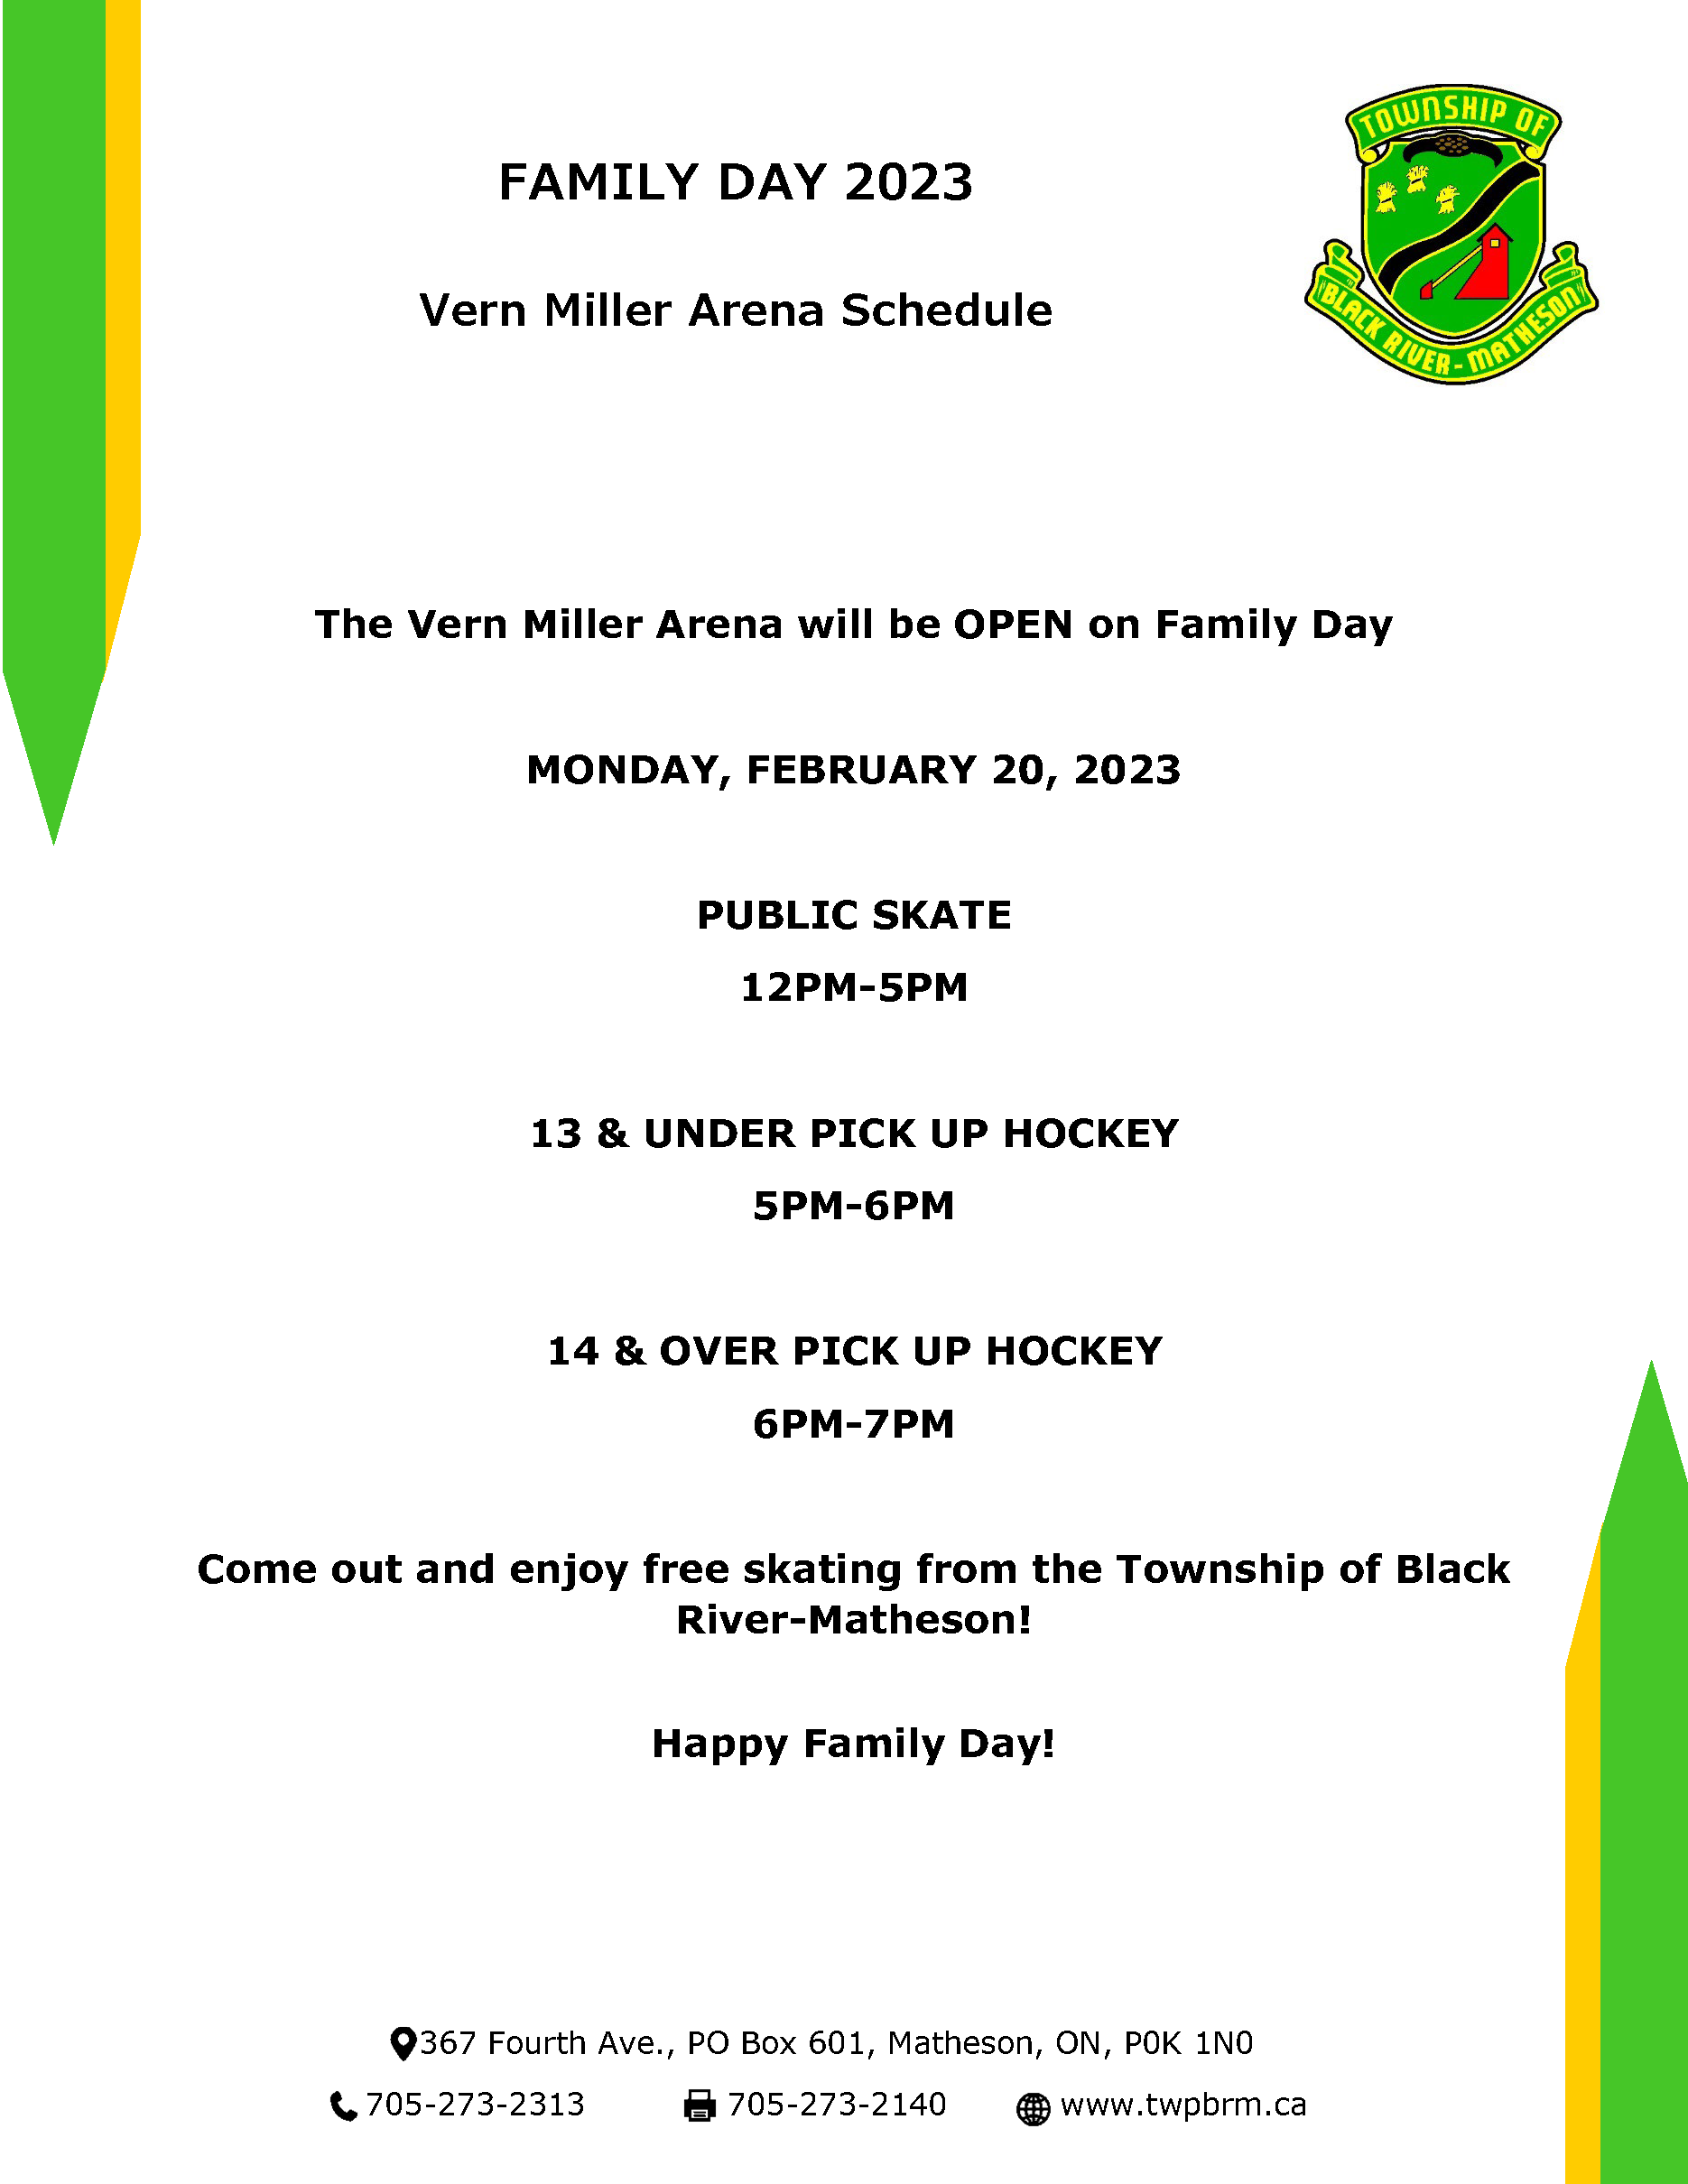 Family Day Arena Schedule 2023